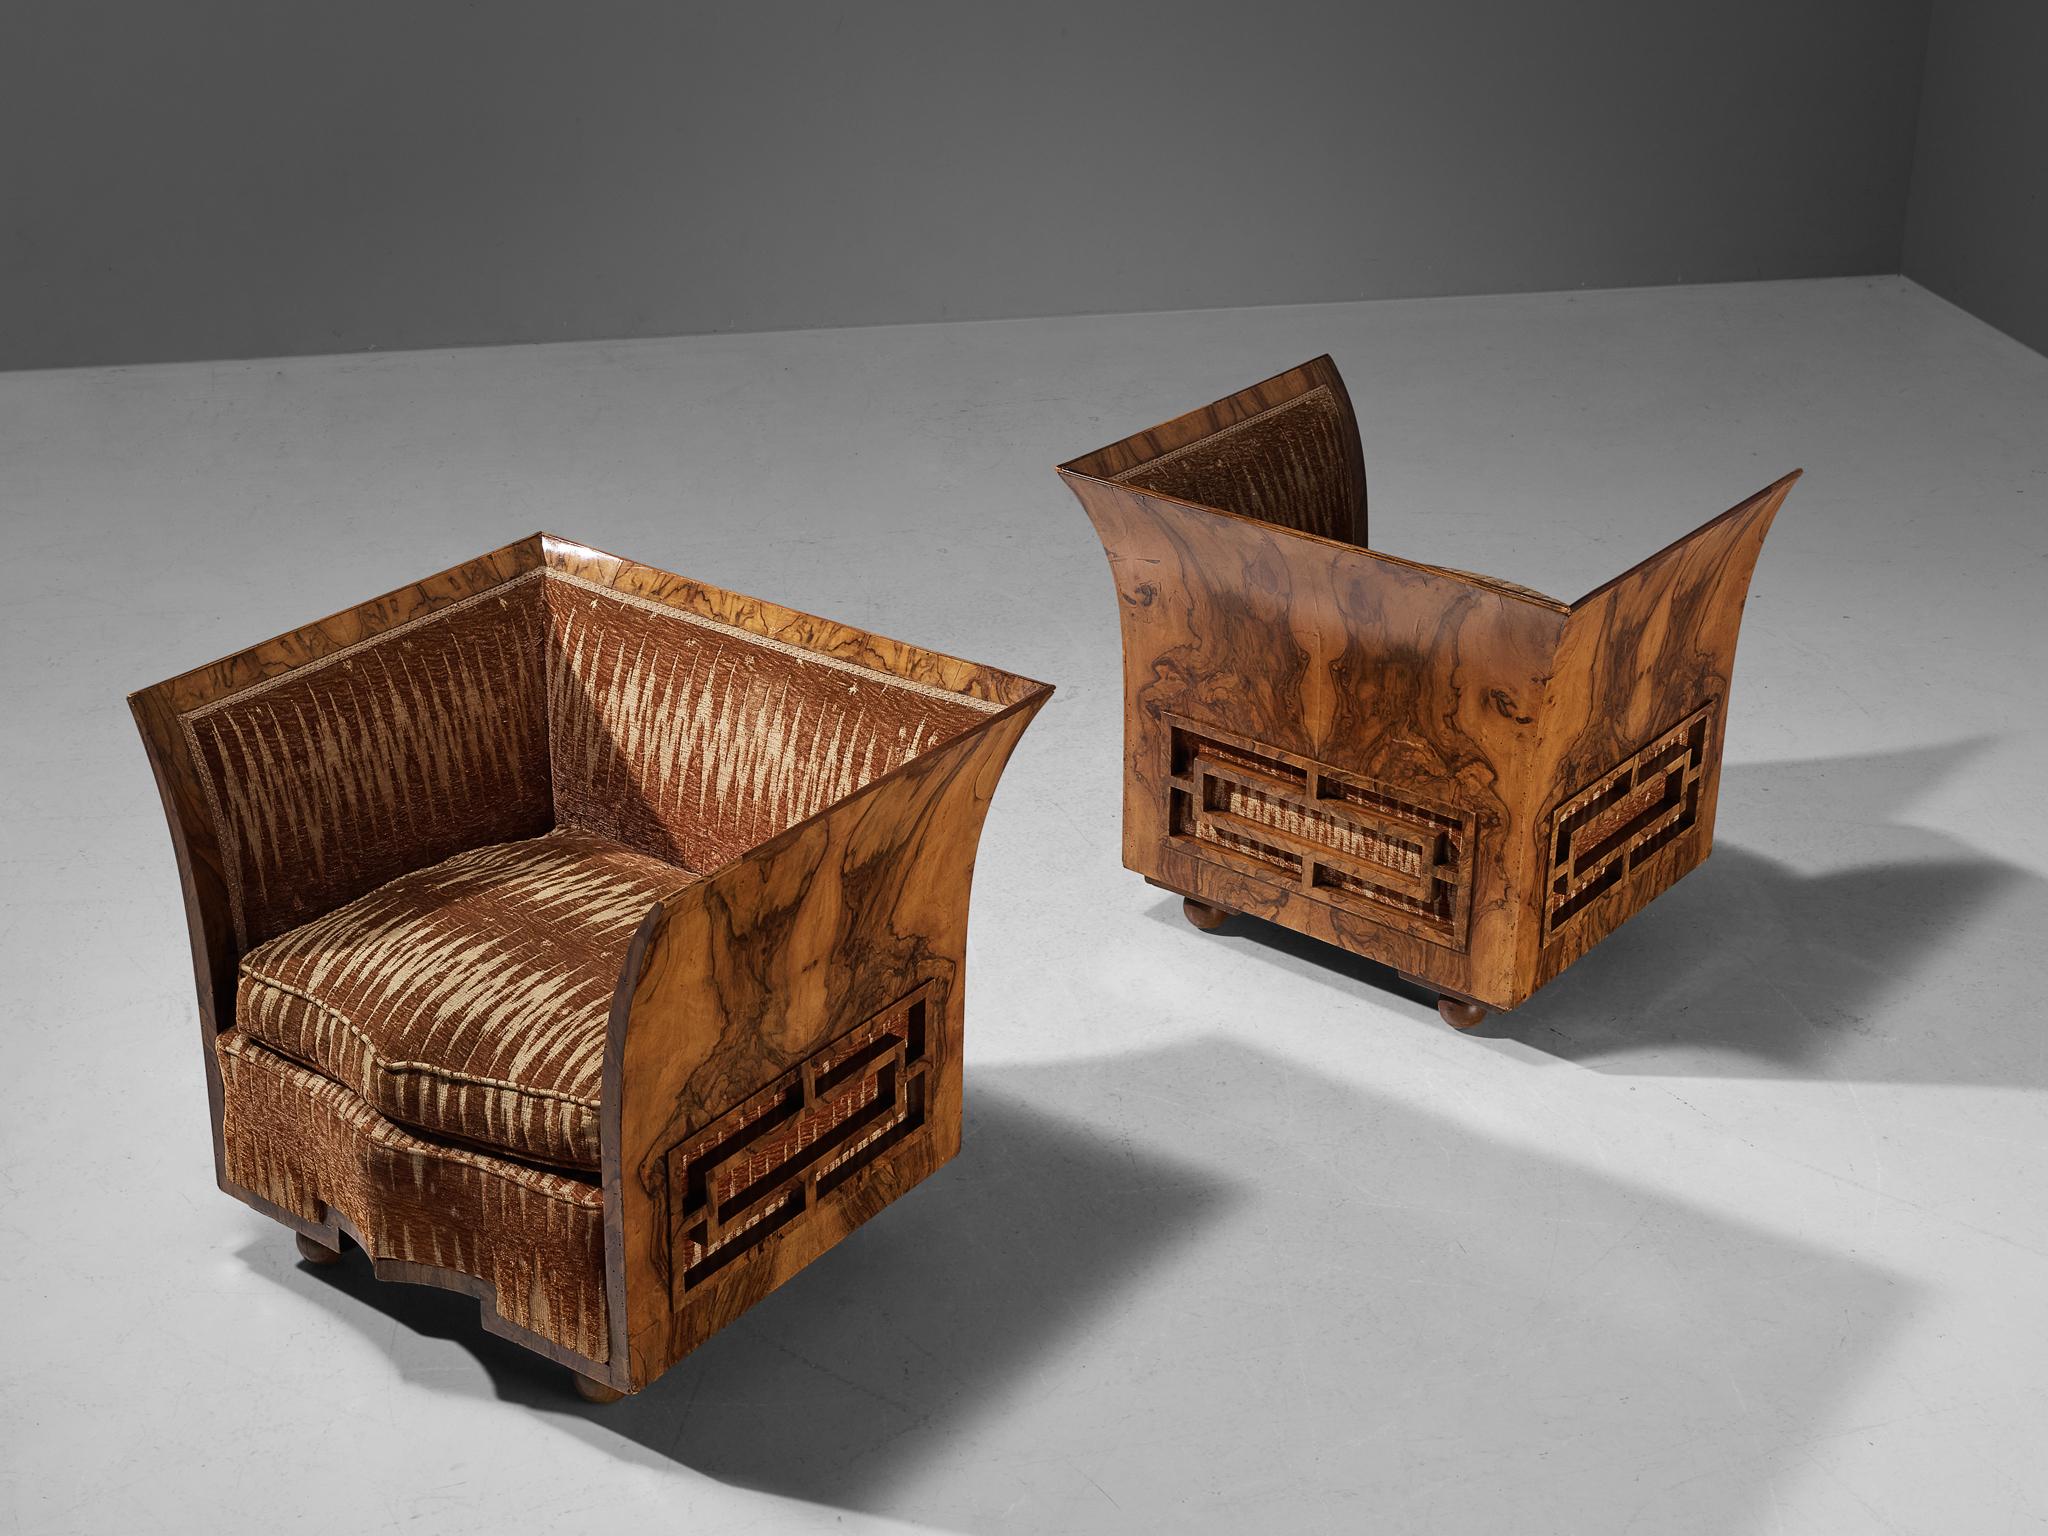 Pair of armchairs, walnut burl, velvet, fabric, Italy, 1930s.
This unique pair of easy chairs is designed according to the Art Deco principles that were in vogue in the 1930s. While the furniture's overall visual appearance was undoubtedly modern,